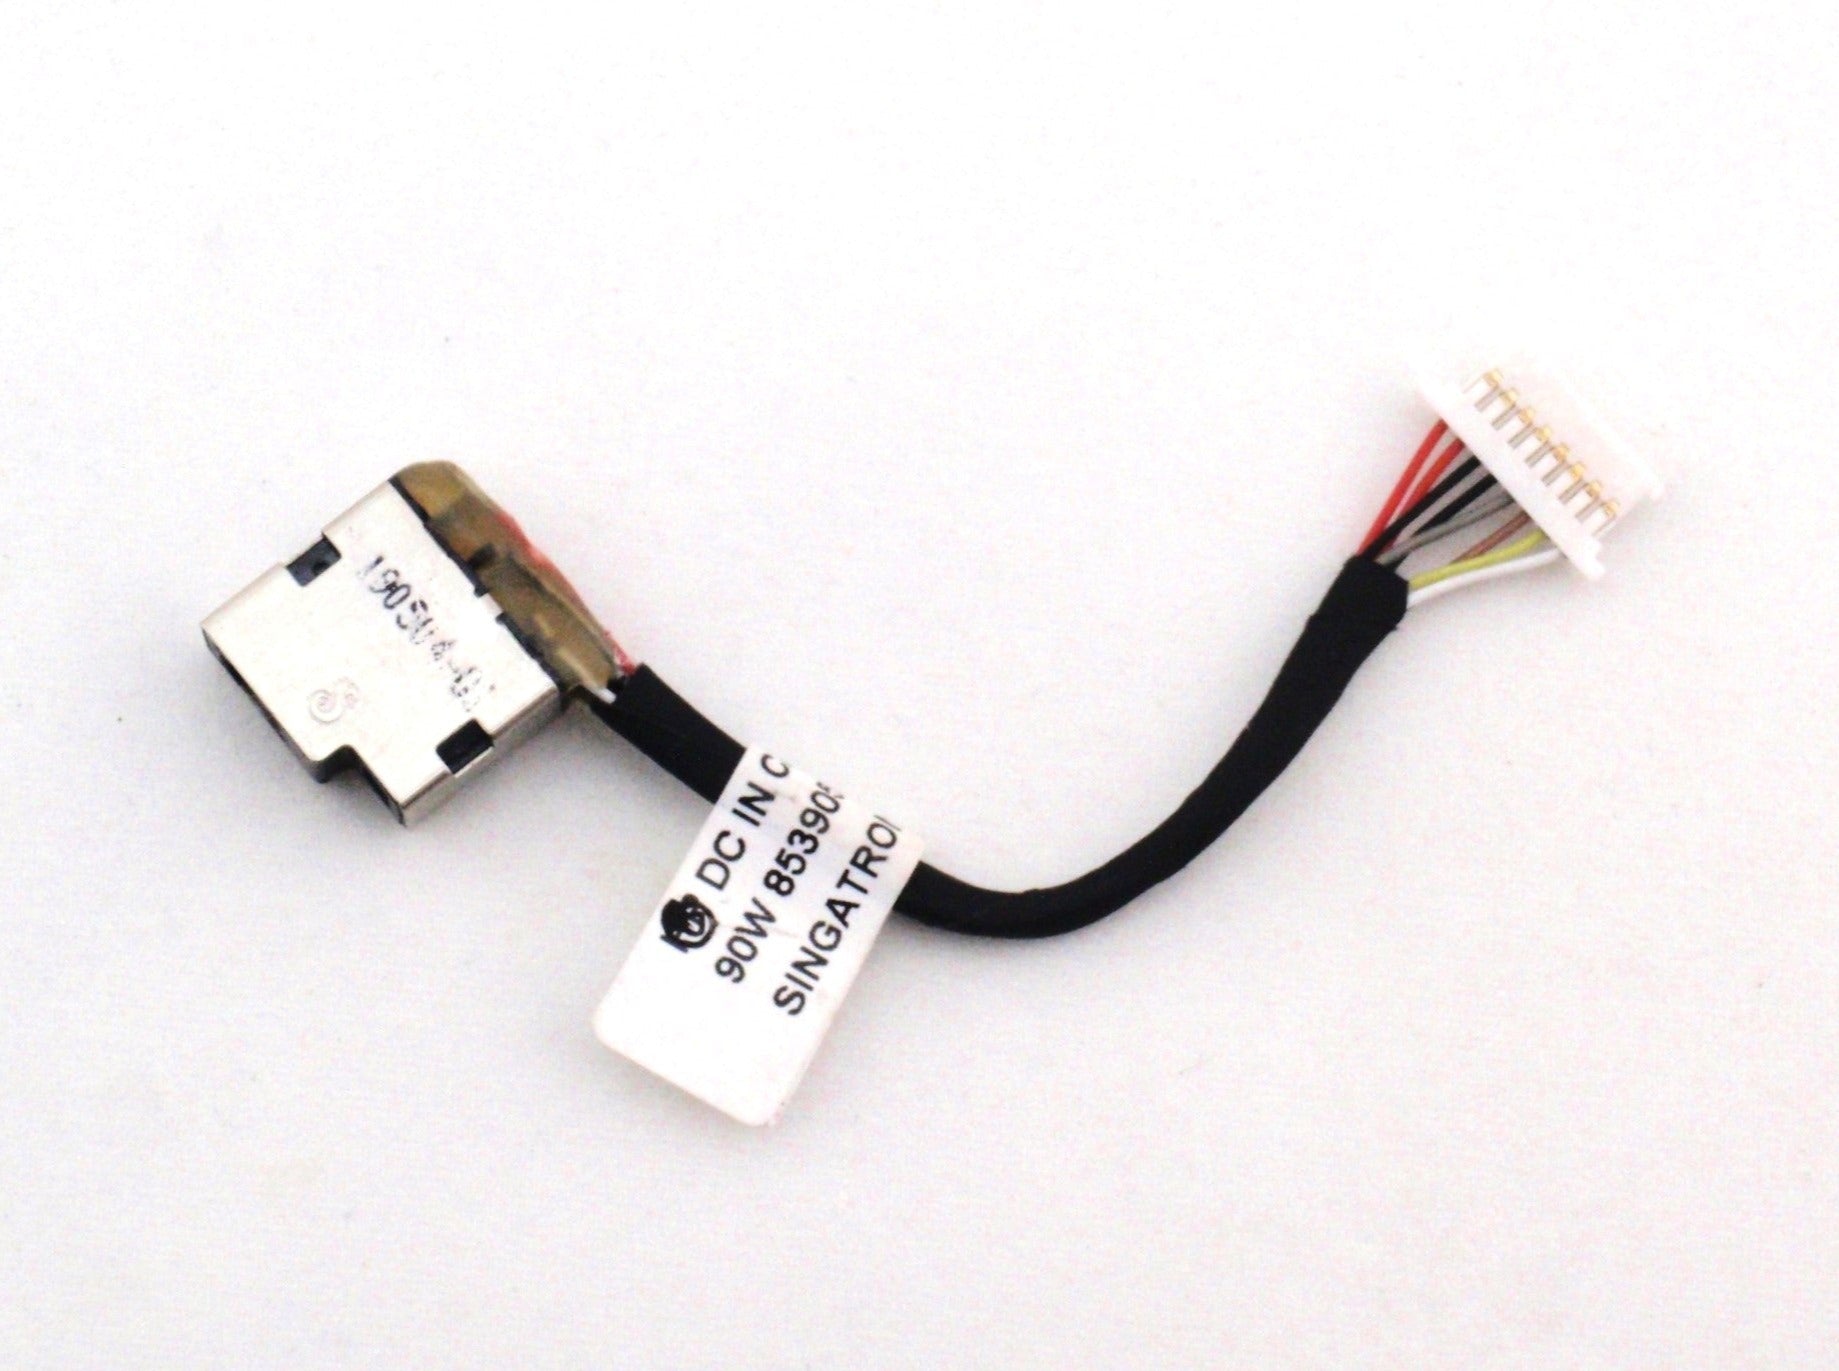 HP DC In Power Jack Charging Cable ProBook 430 440 450 470 G4 430G4 440G4 450G4 470G4 853905-F7A -S7A -Y7A CBL00760-0050 905644-001